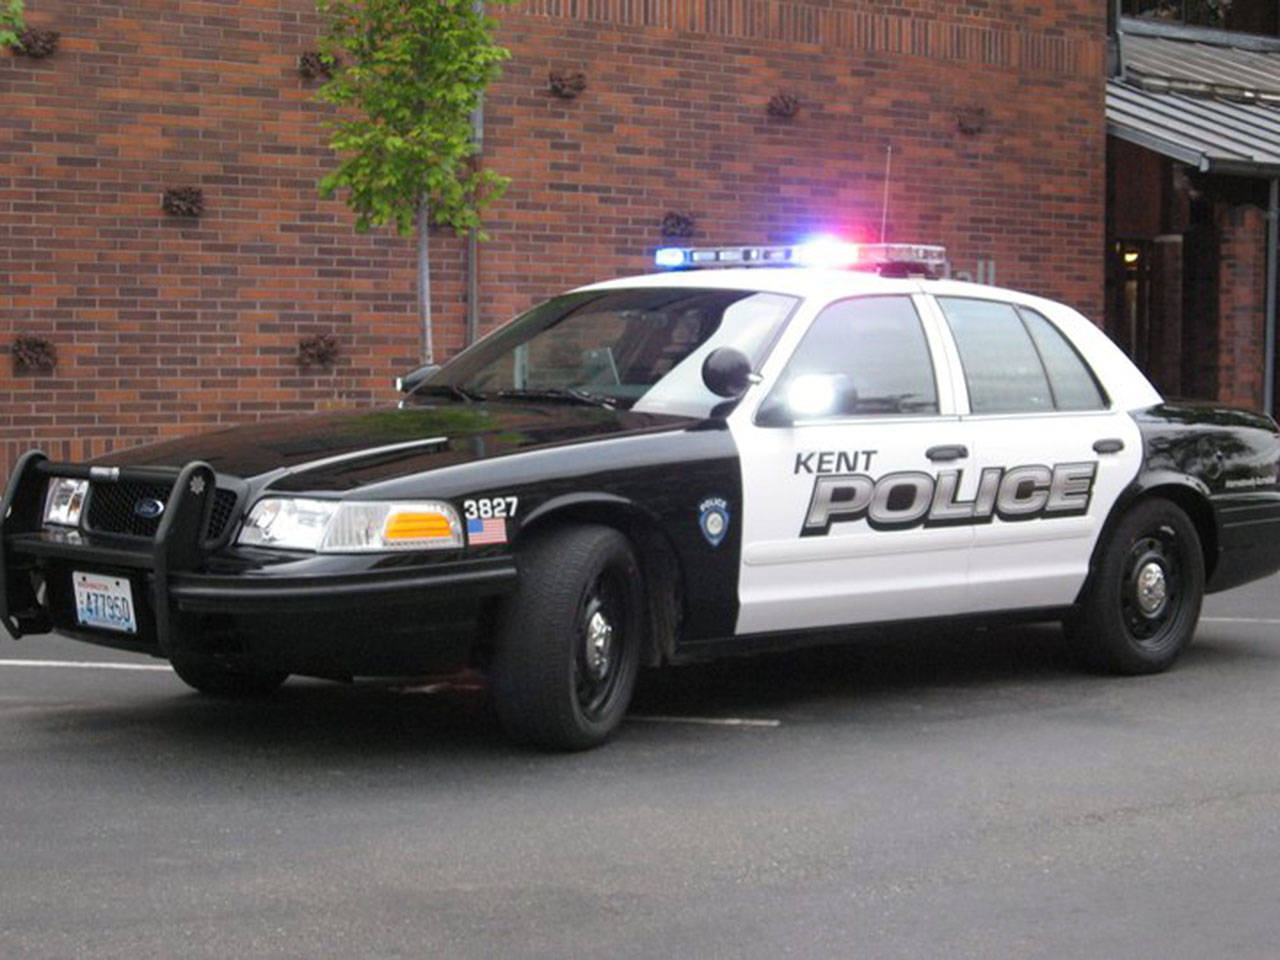 Kent man tries to get woman to pay for return of stolen purse | Police Blotter